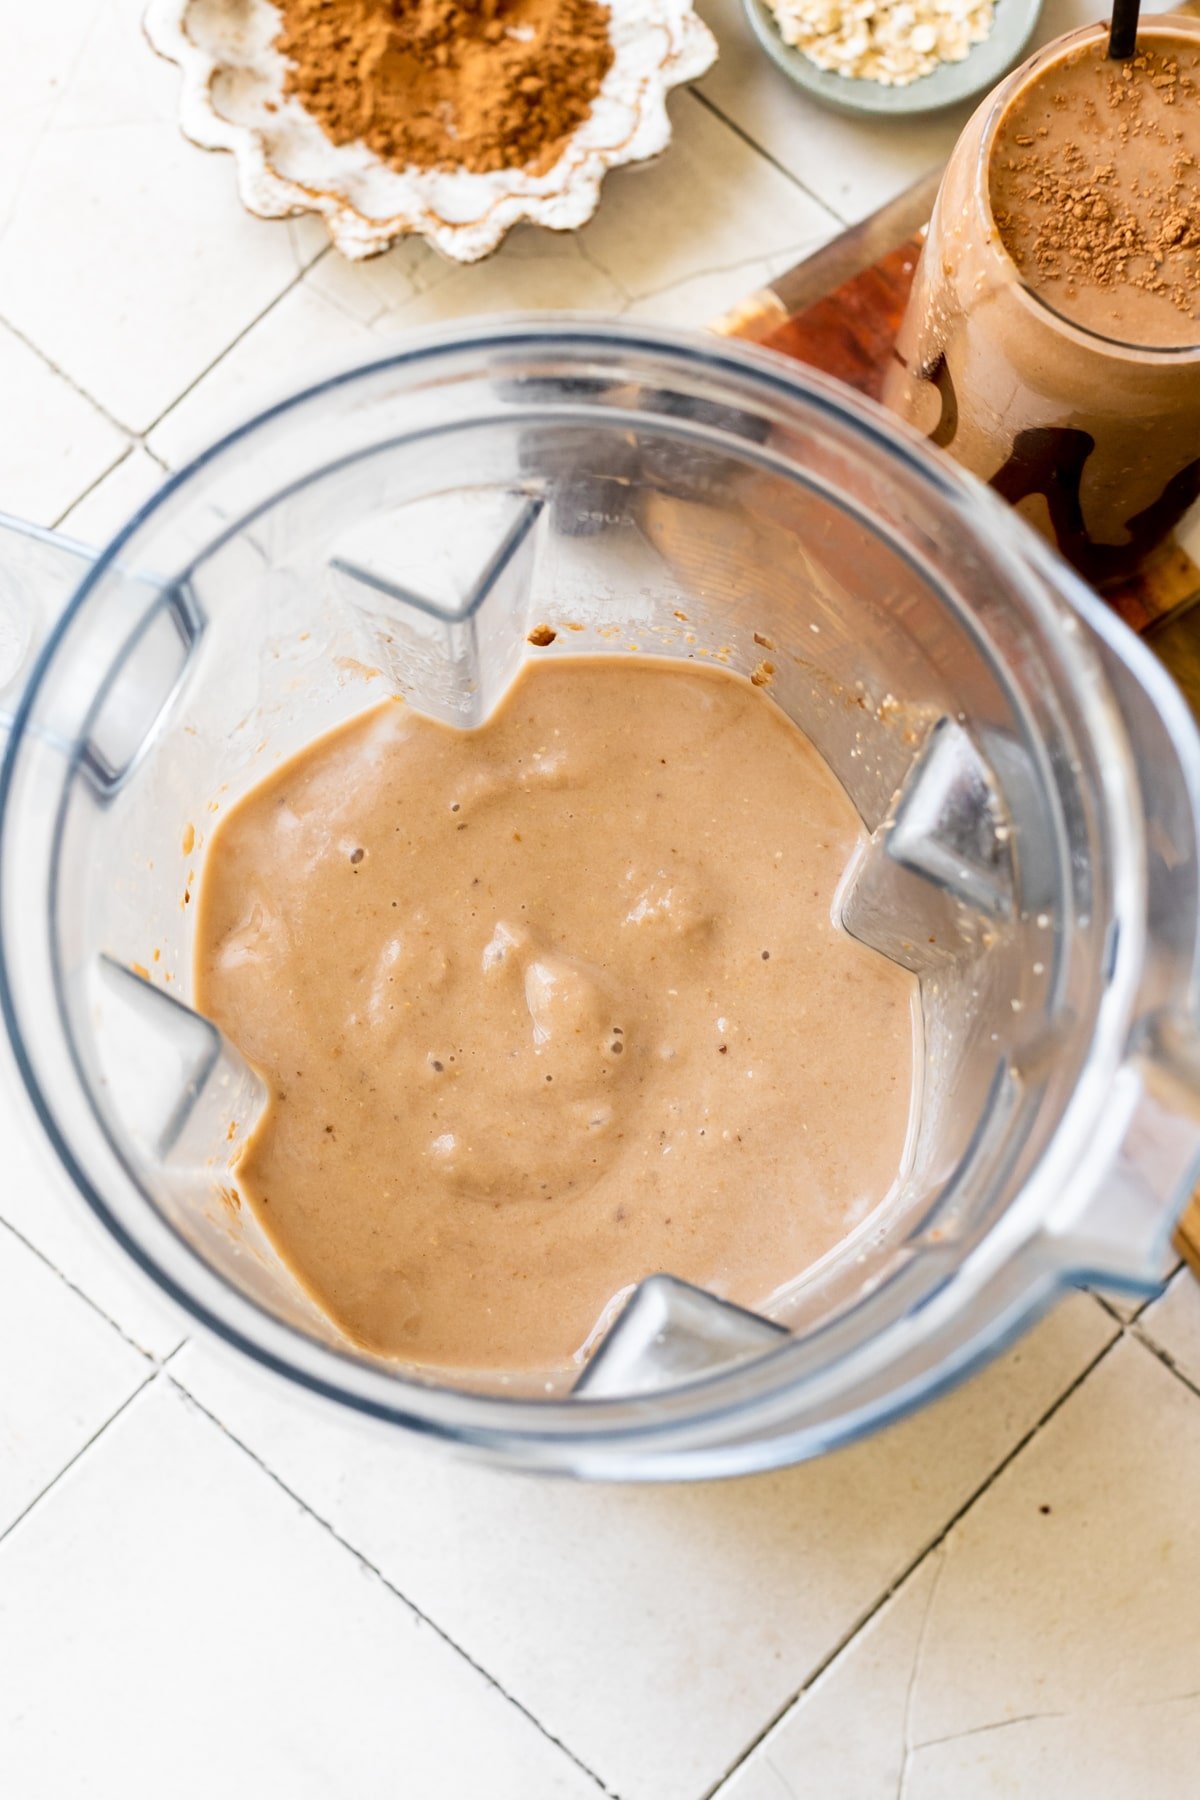 a creamy chocolate smoothie blended up in a blender